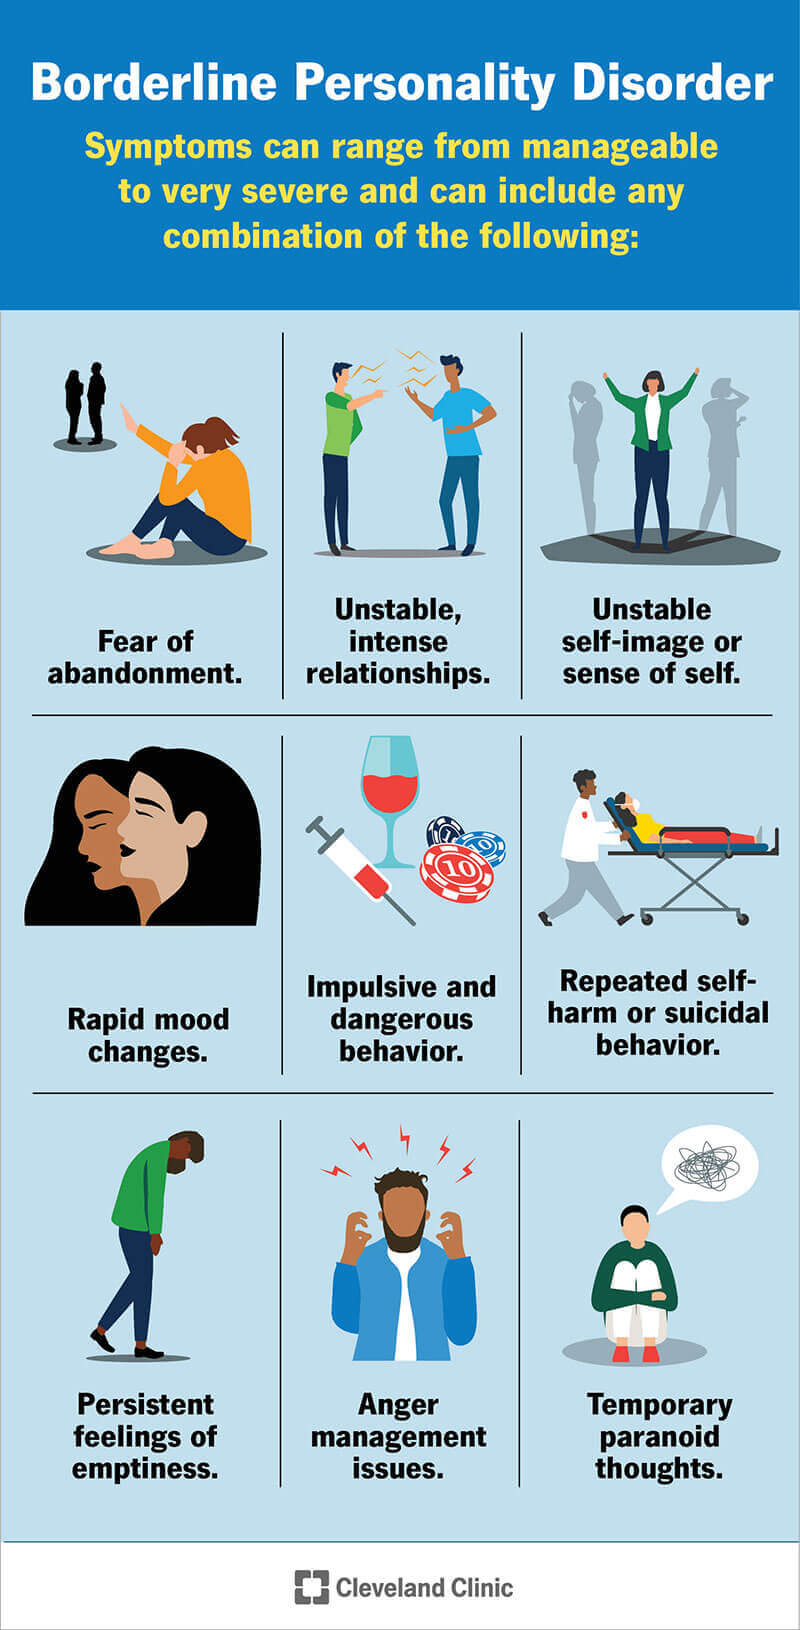 Signs of borderline personality disorder include fear of abandonment, unstable sense of self, anger management issues and more.